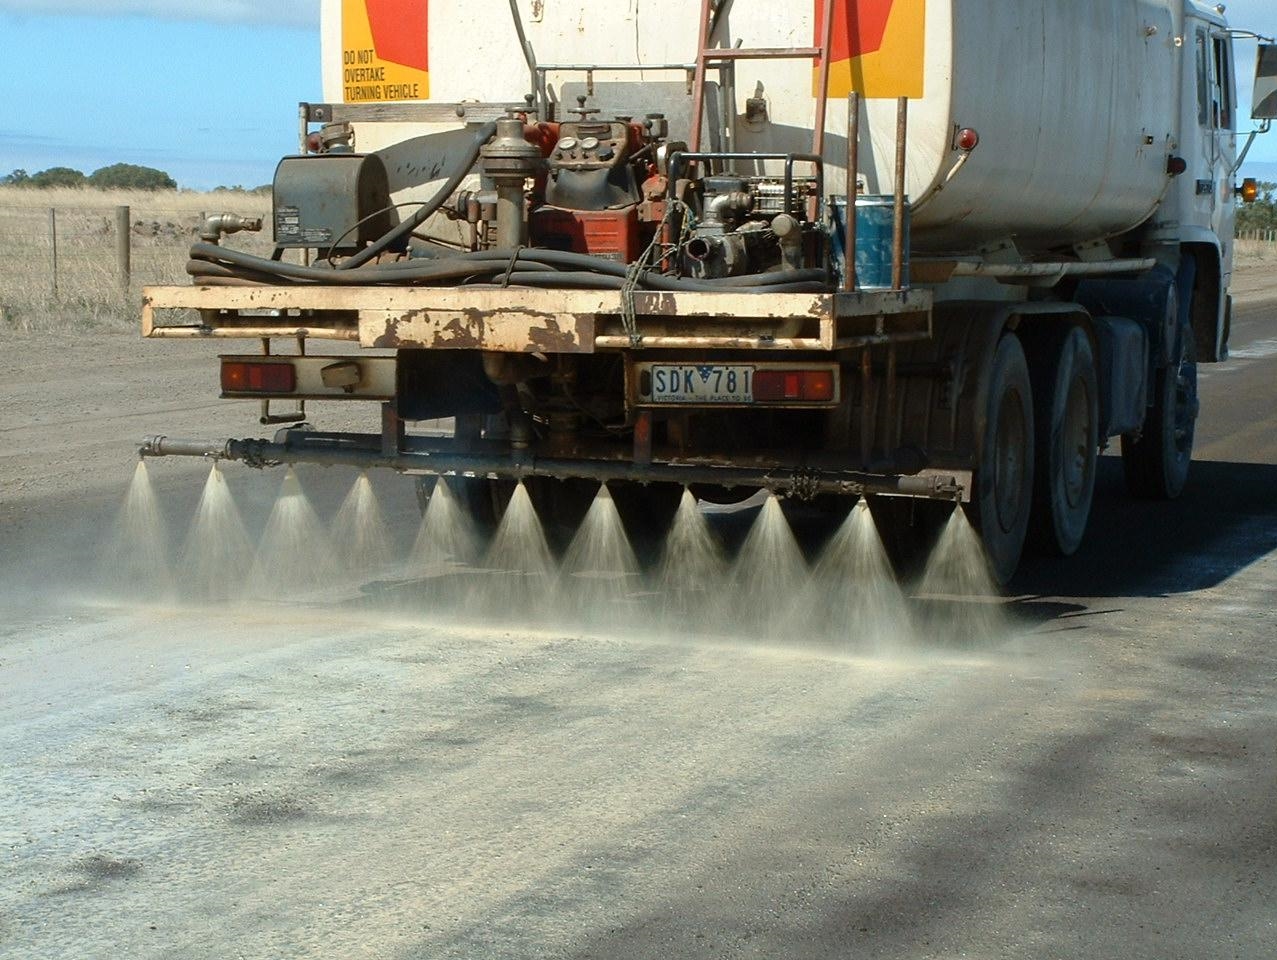  The Soilbond dust control solution being applied with a water cart spray bar 